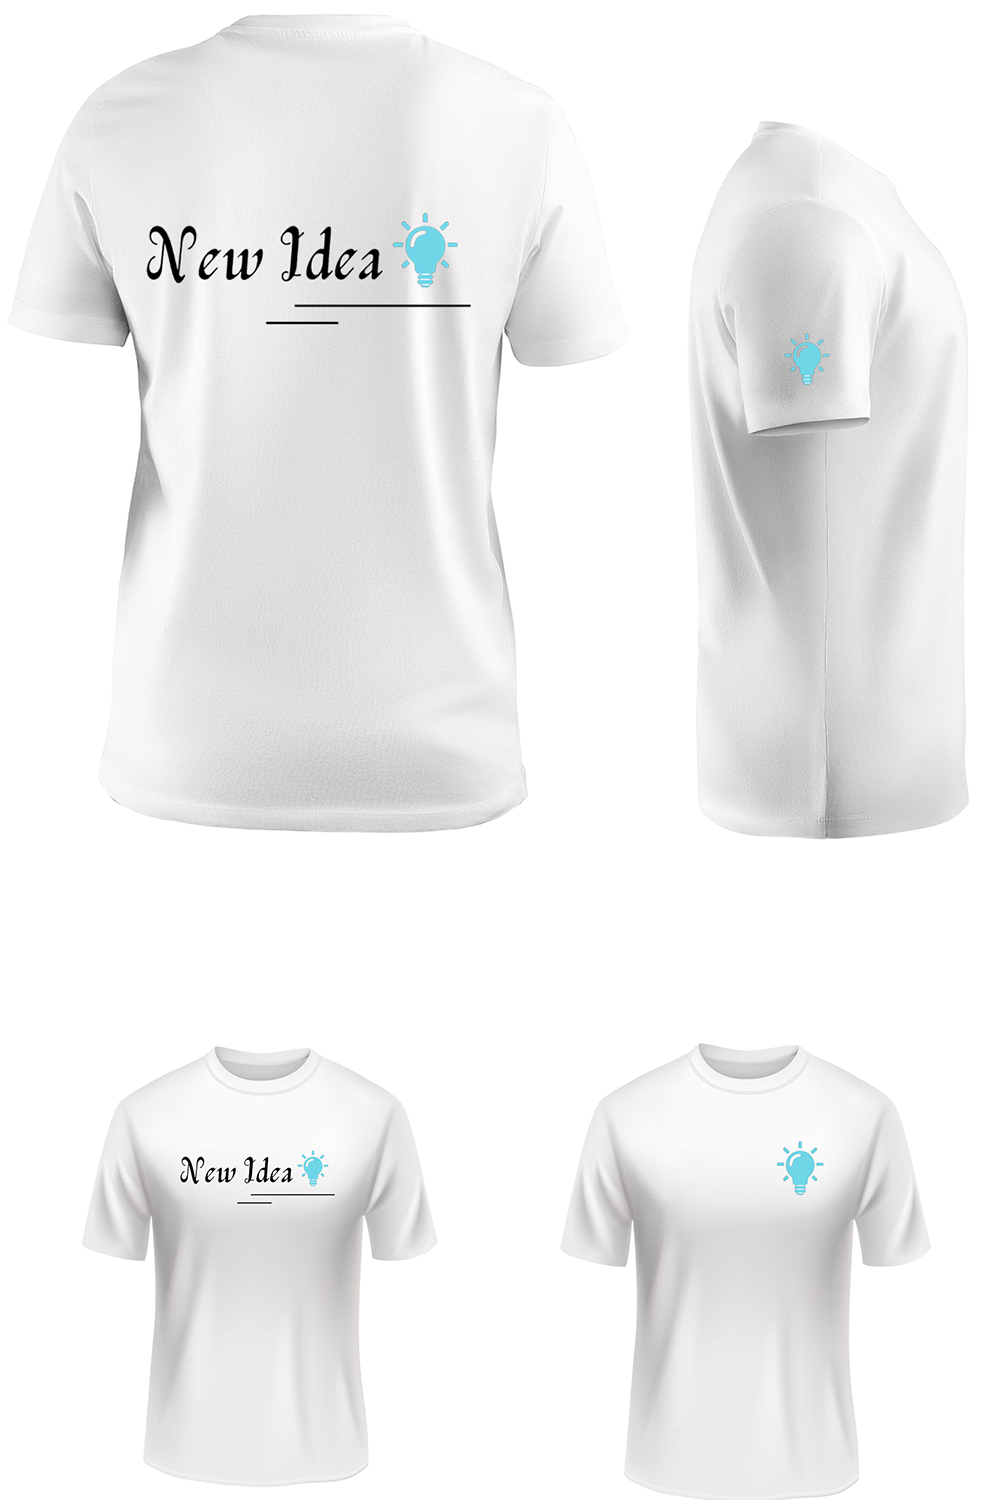 T-shirt design for printing - New Idea pinterest preview image.